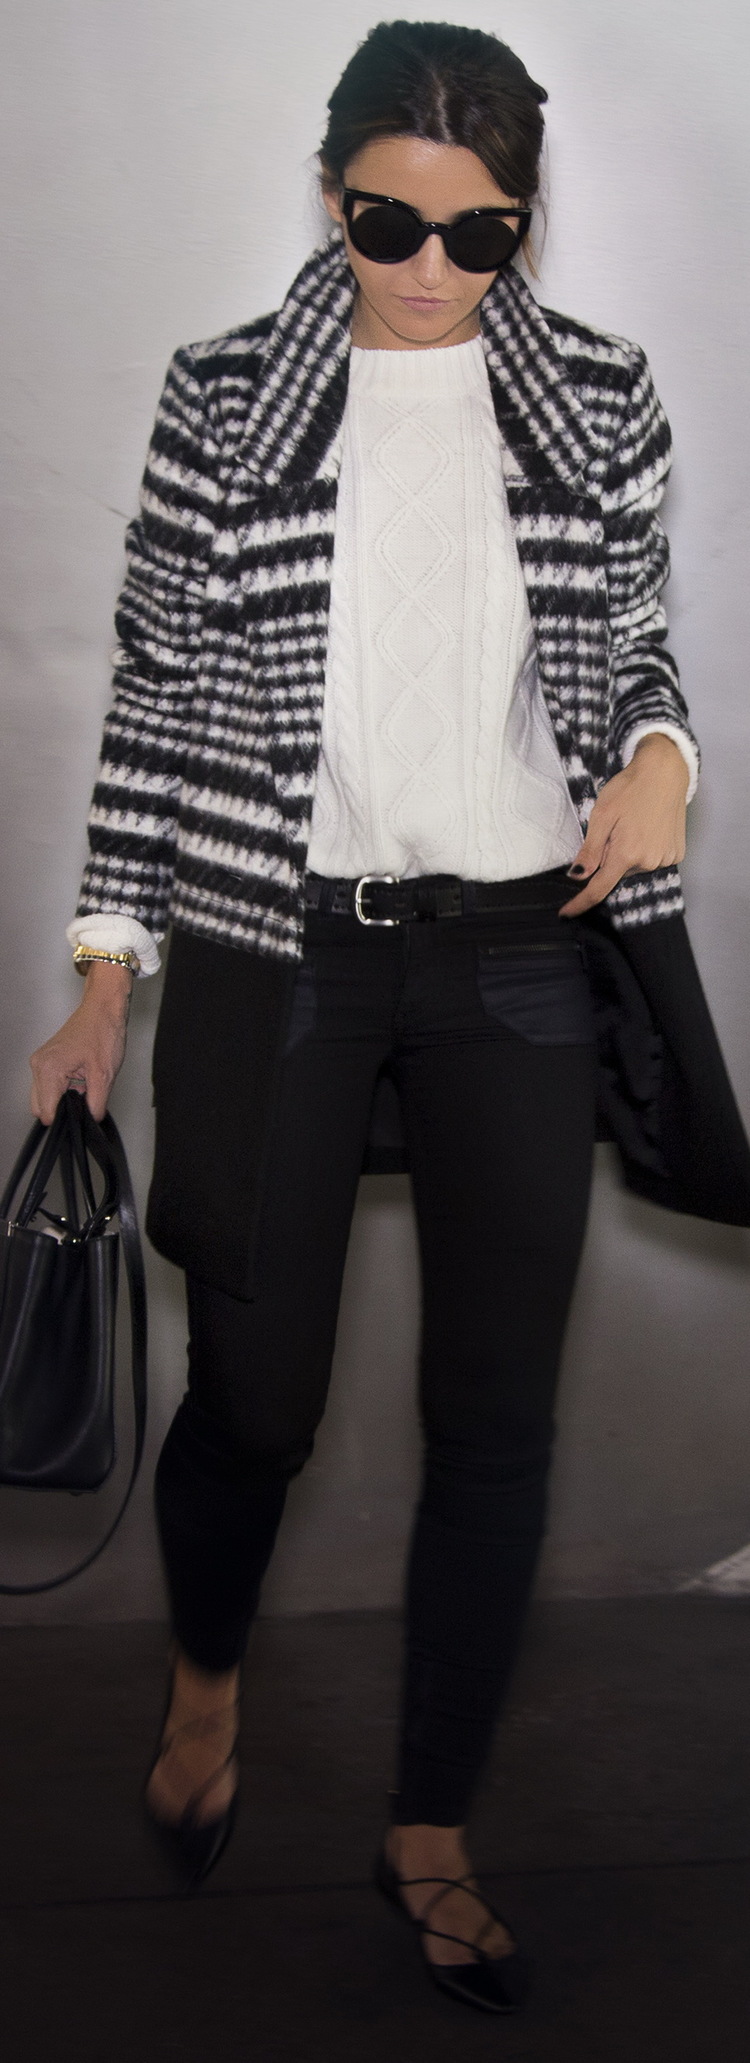 Black + White Outfit by Lovely Pepa